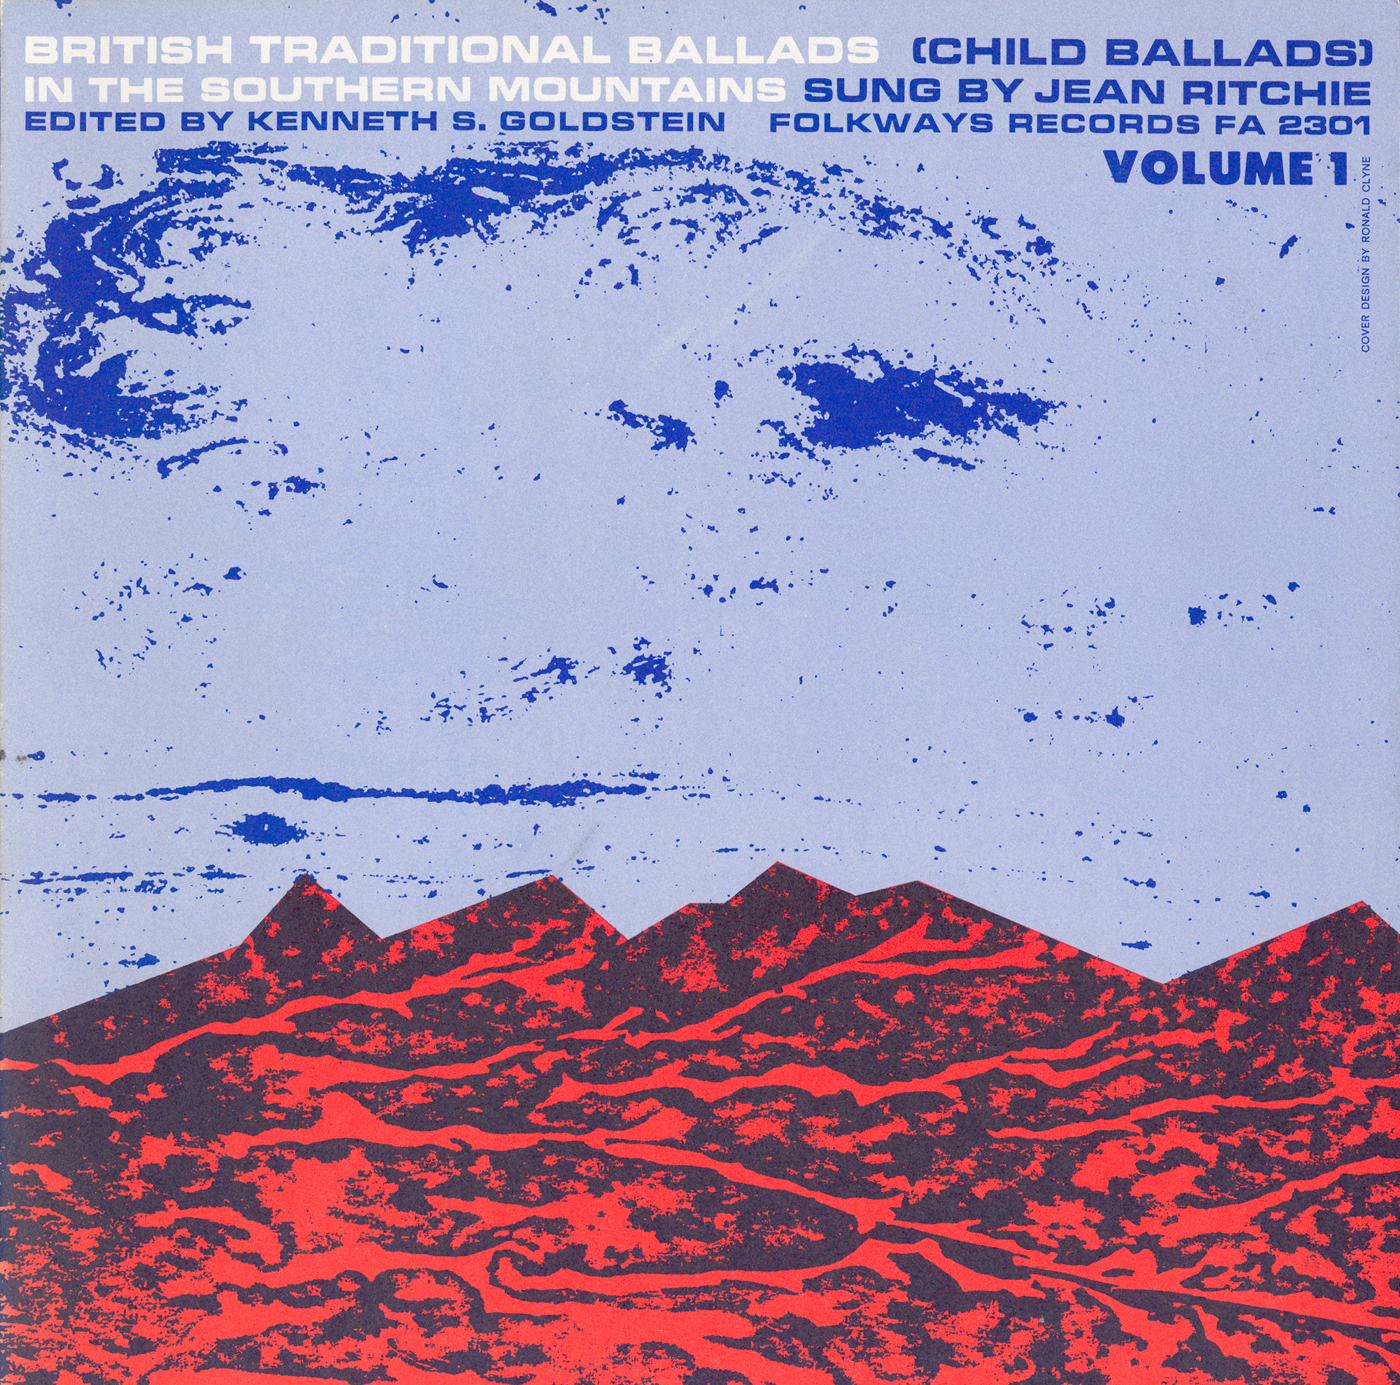 British Traditional Ballads in the Southern Mountains, Volume 1 ...